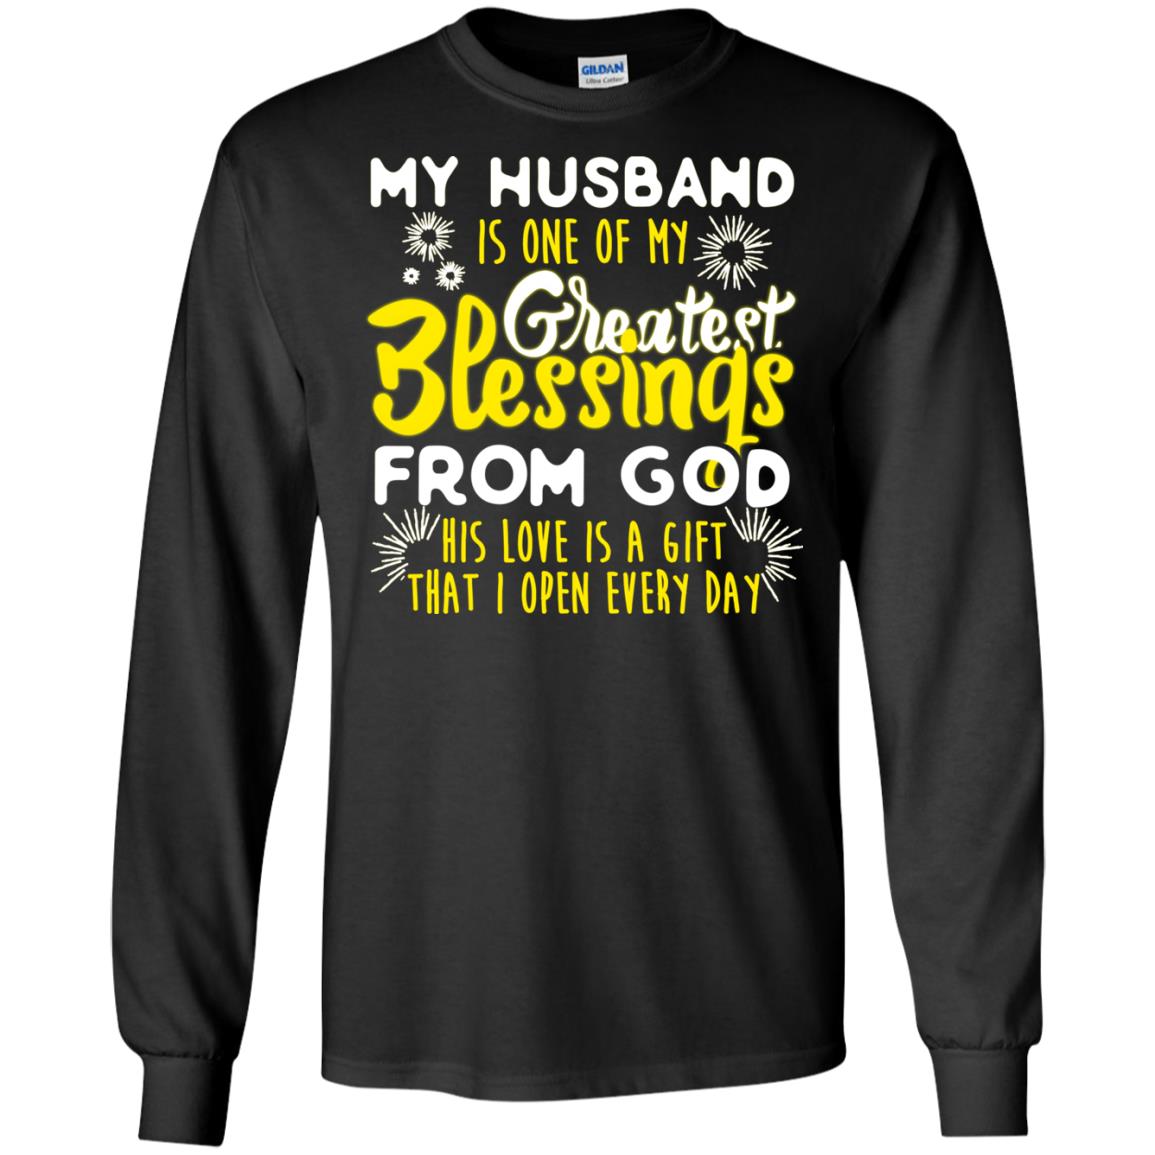 My Husband Is One Of My Greatest Blessings From God His Love Is A Gift That I Open Every Day Shirt For WifeG240 Gildan LS Ultra Cotton T-Shirt